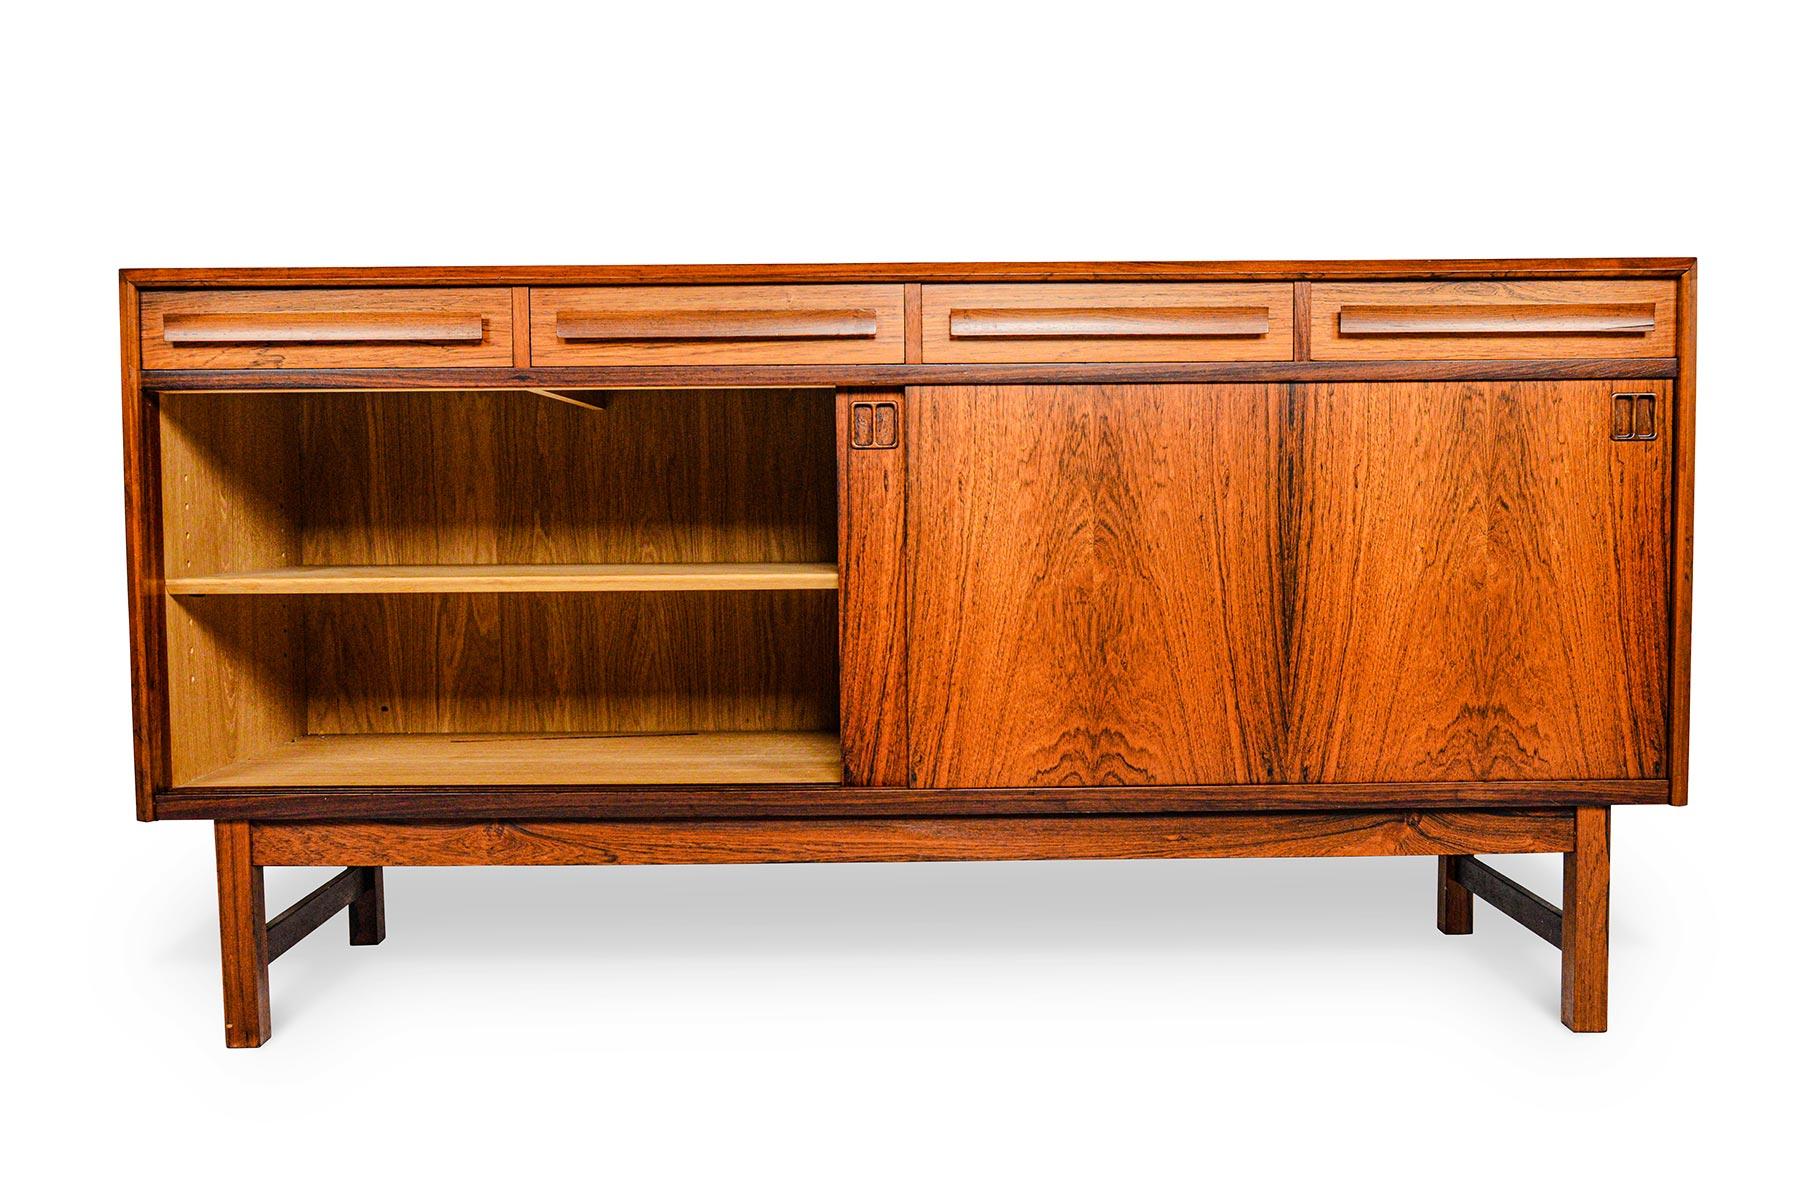 This mid-sized Danish modern midcentury credenza is crafted in rosewood and offers exceptional storage capabilities! With bold, modern lines, this piece can easily slip into any decor. Two large sliding doors open to reveal two bays outfitted with